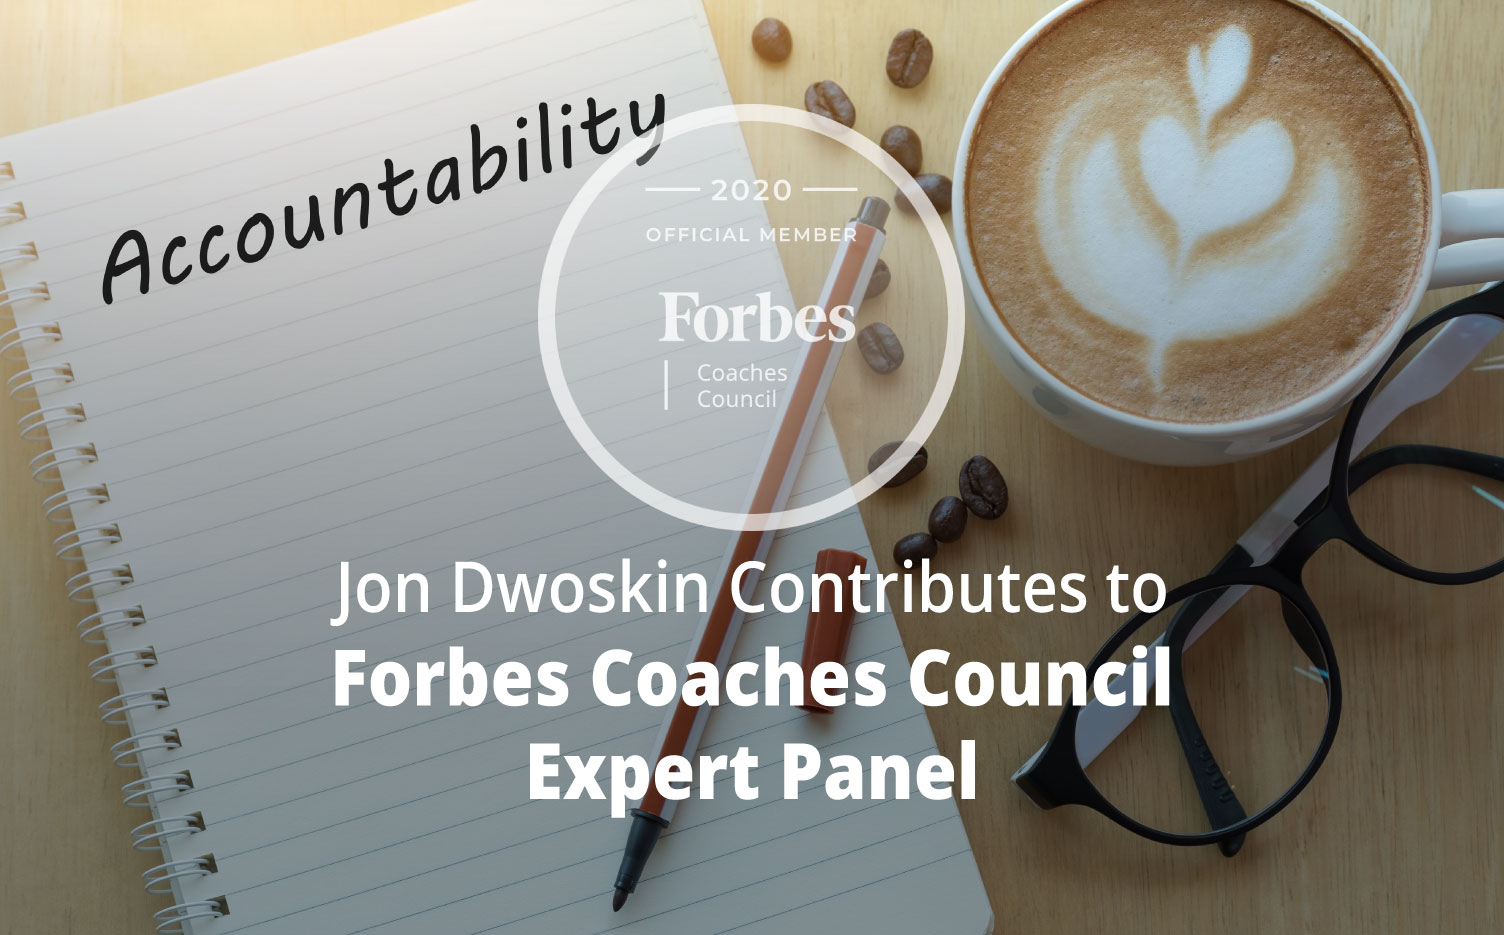 Jon Dwoskin Contributes to Forbes Coaches Council Expert Panel: 15 Ways For Business Leaders To Be Accountable For Bad Decisions